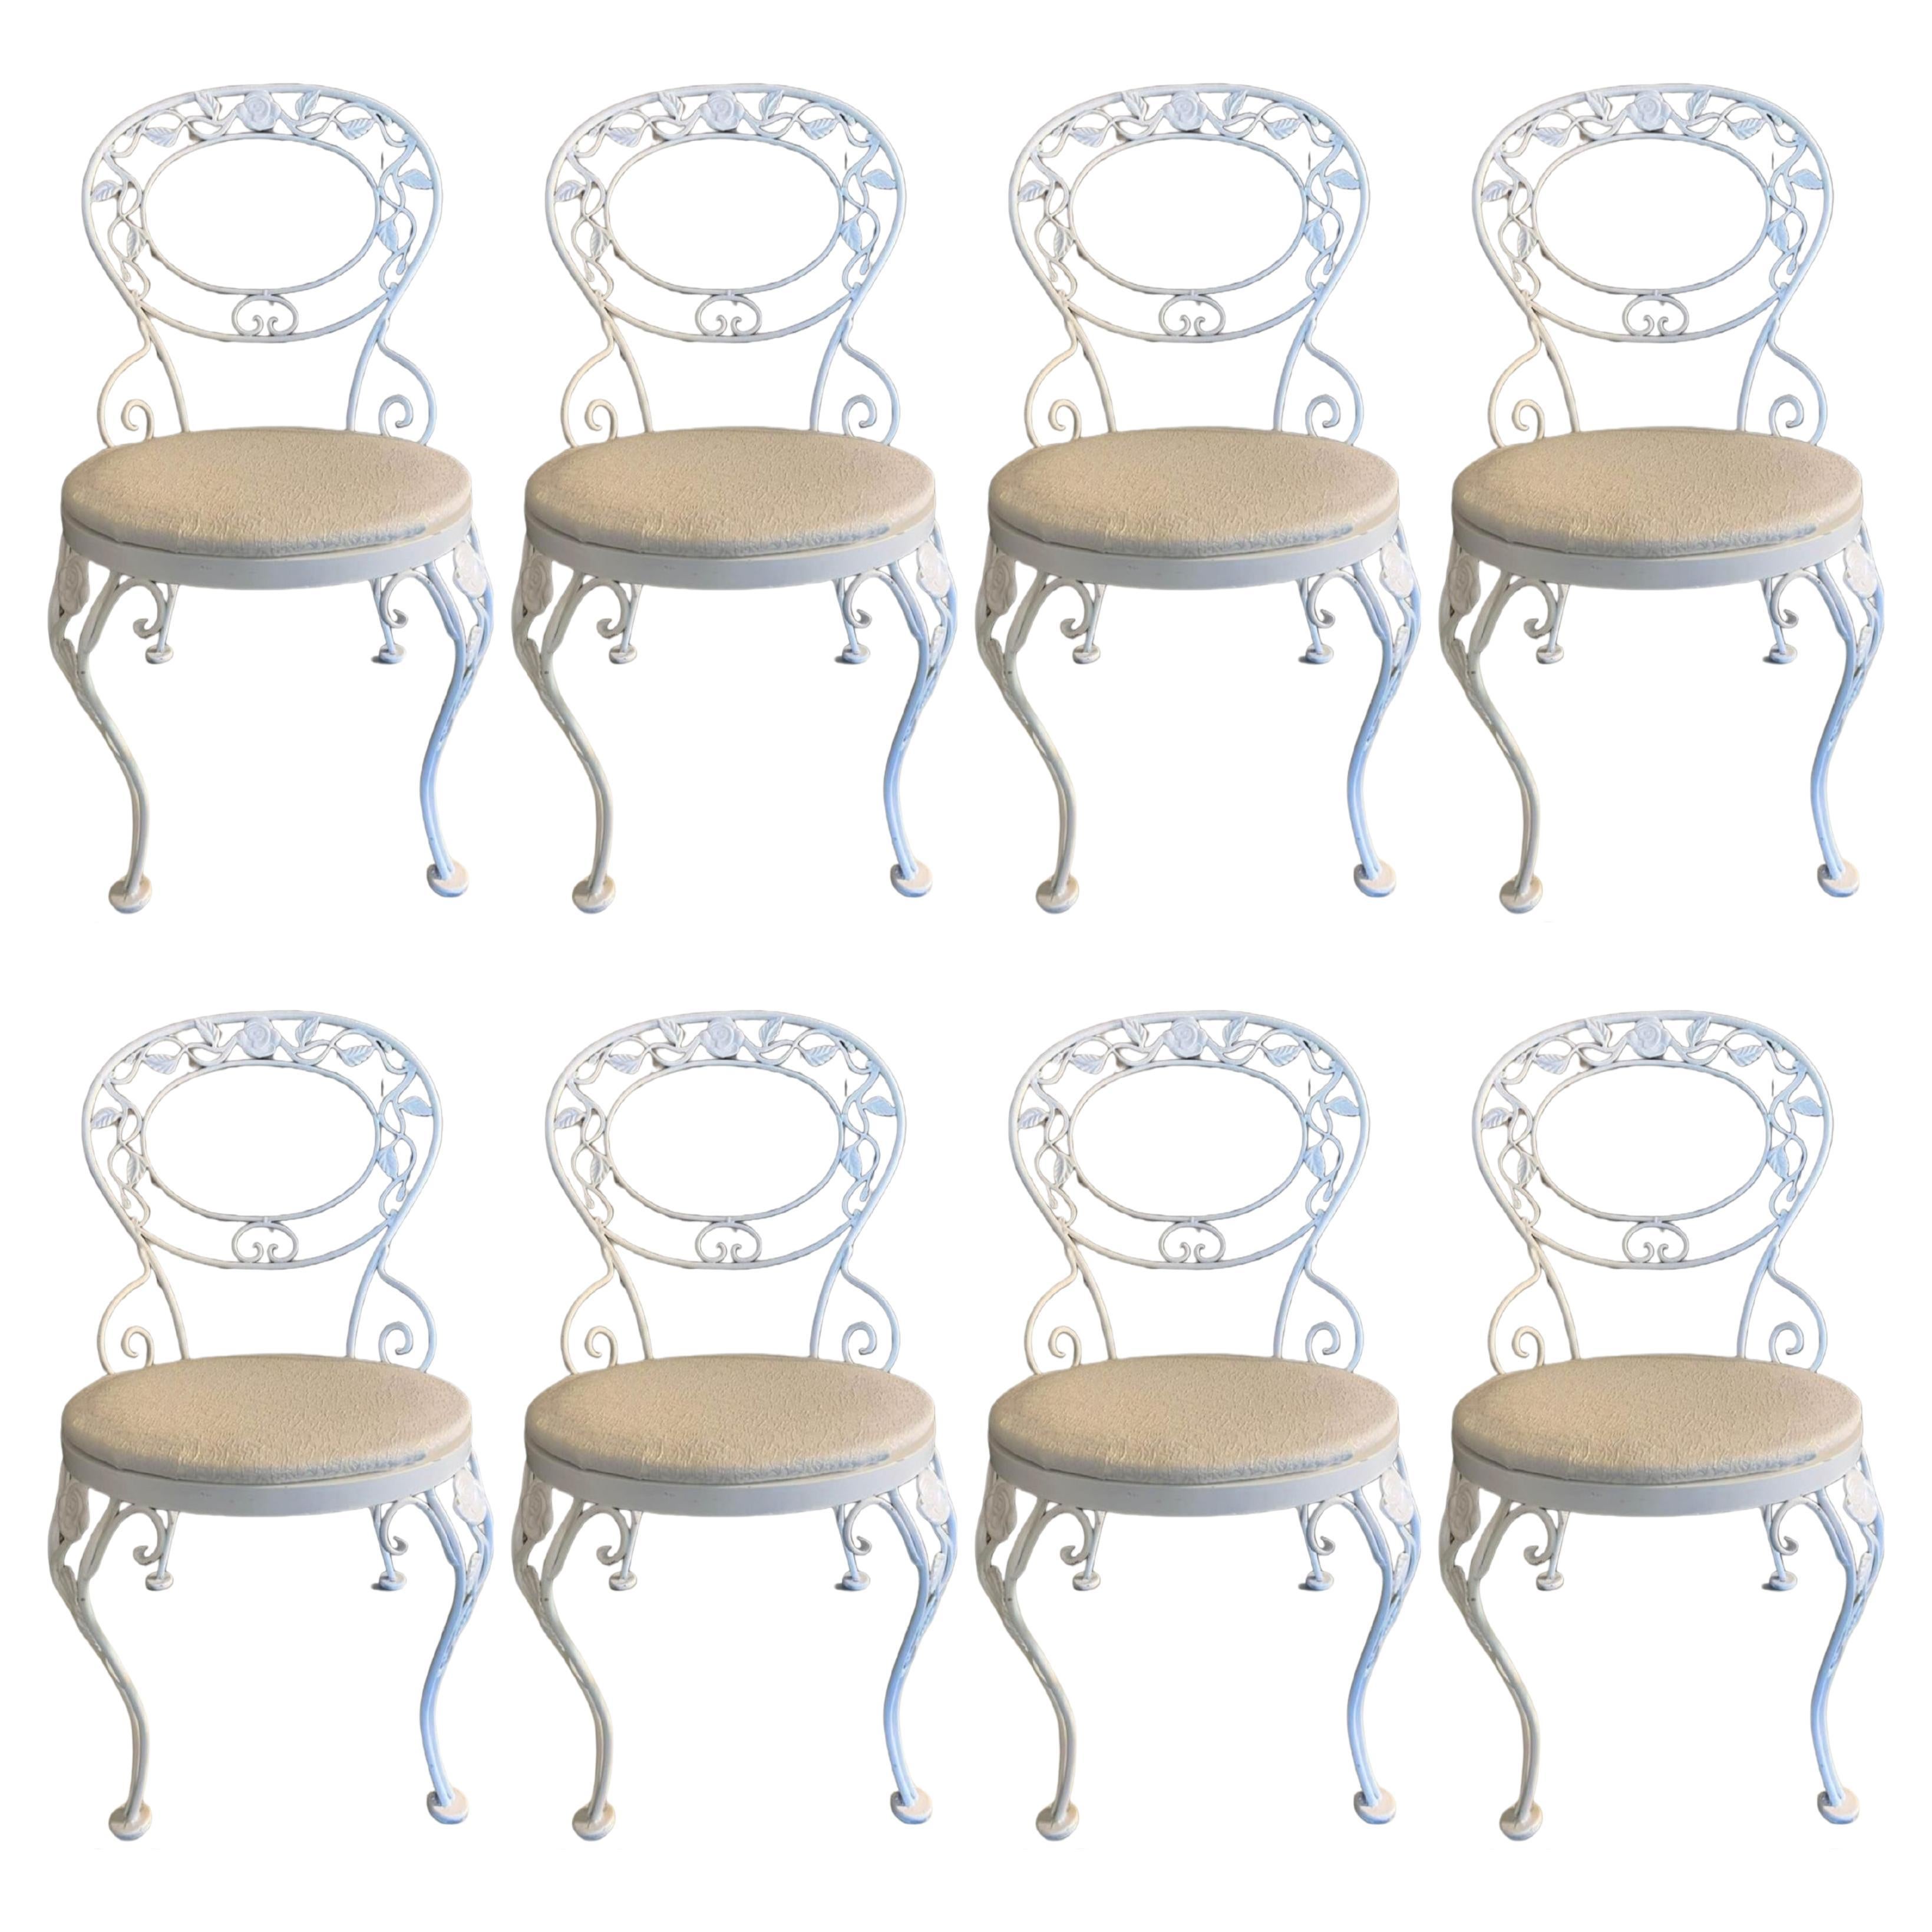 Woodard Wrought Iron Outdoor Patio Seating Set of 8 Chairs